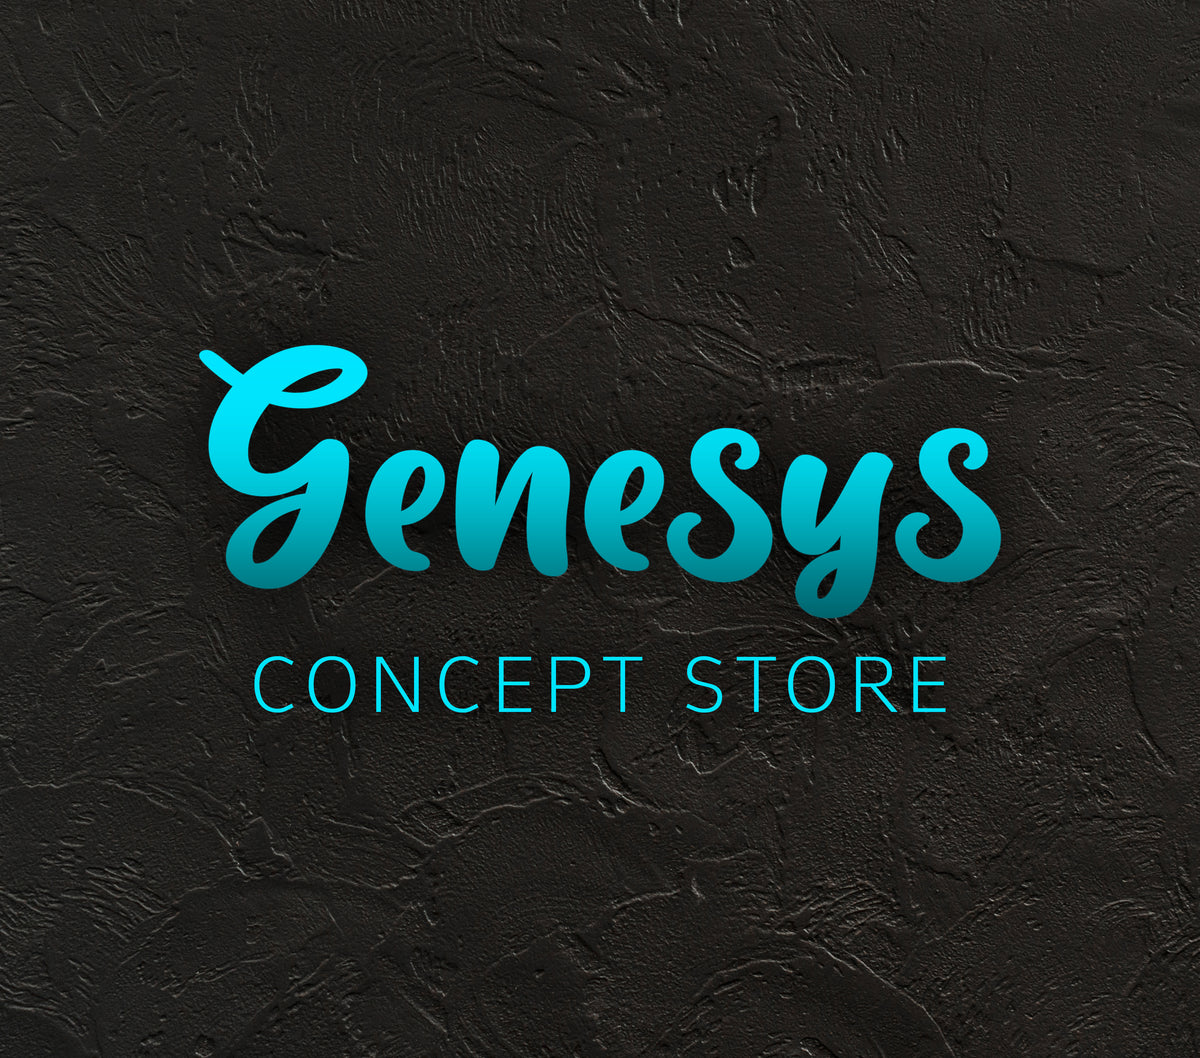 Genesys Store Concept